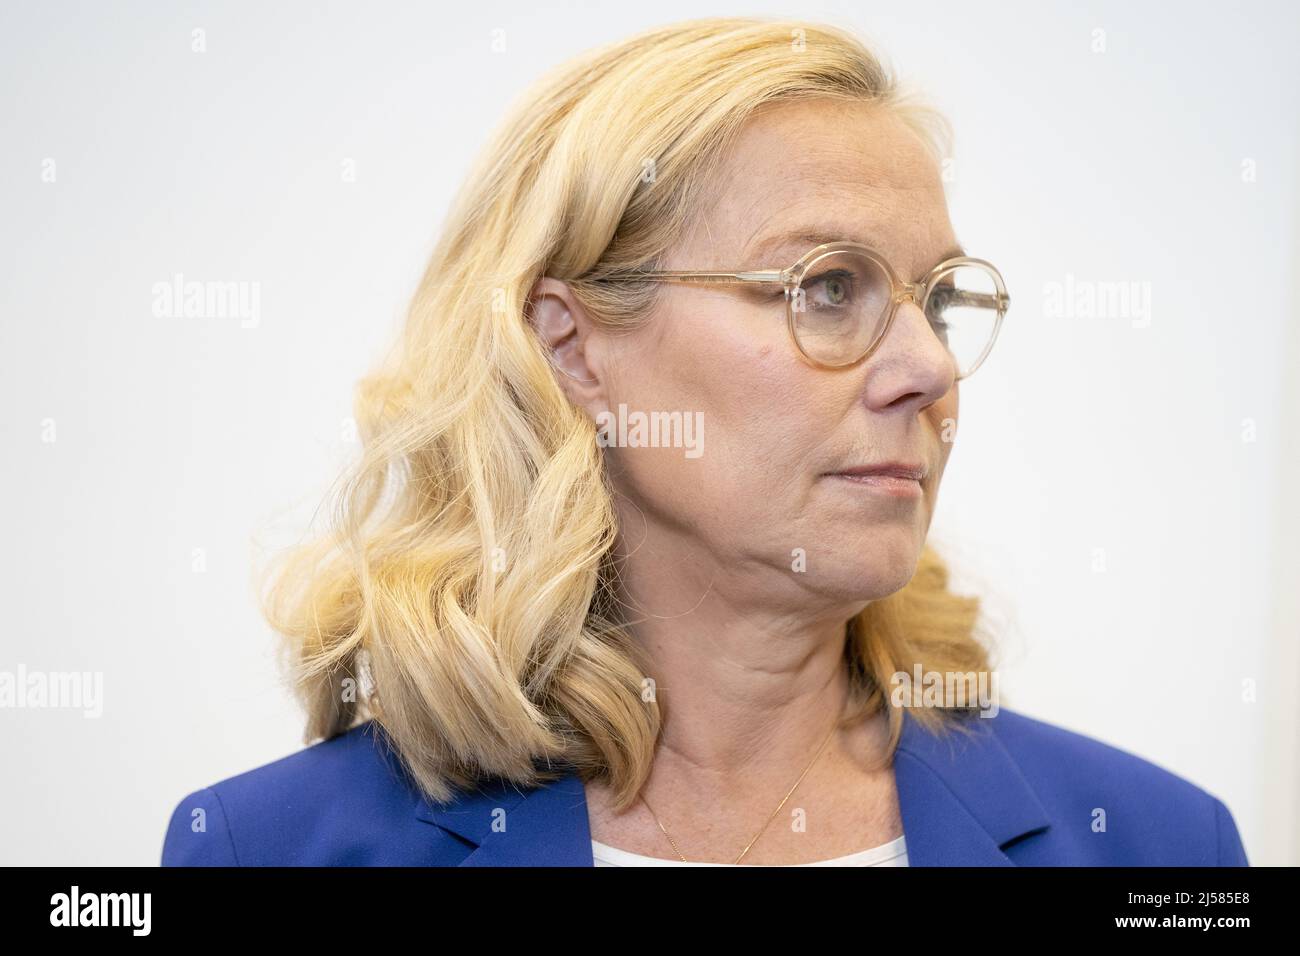 2022-04-21 13:47:54 THE HAGUE - Sigrid Kaag, Minister of Finance, listens to party chairman Victor Everhardt who explains the weighting of the national board of the conclusions of the BING report. ANP BART SIZE netherlands out - belgium out Stock Photo